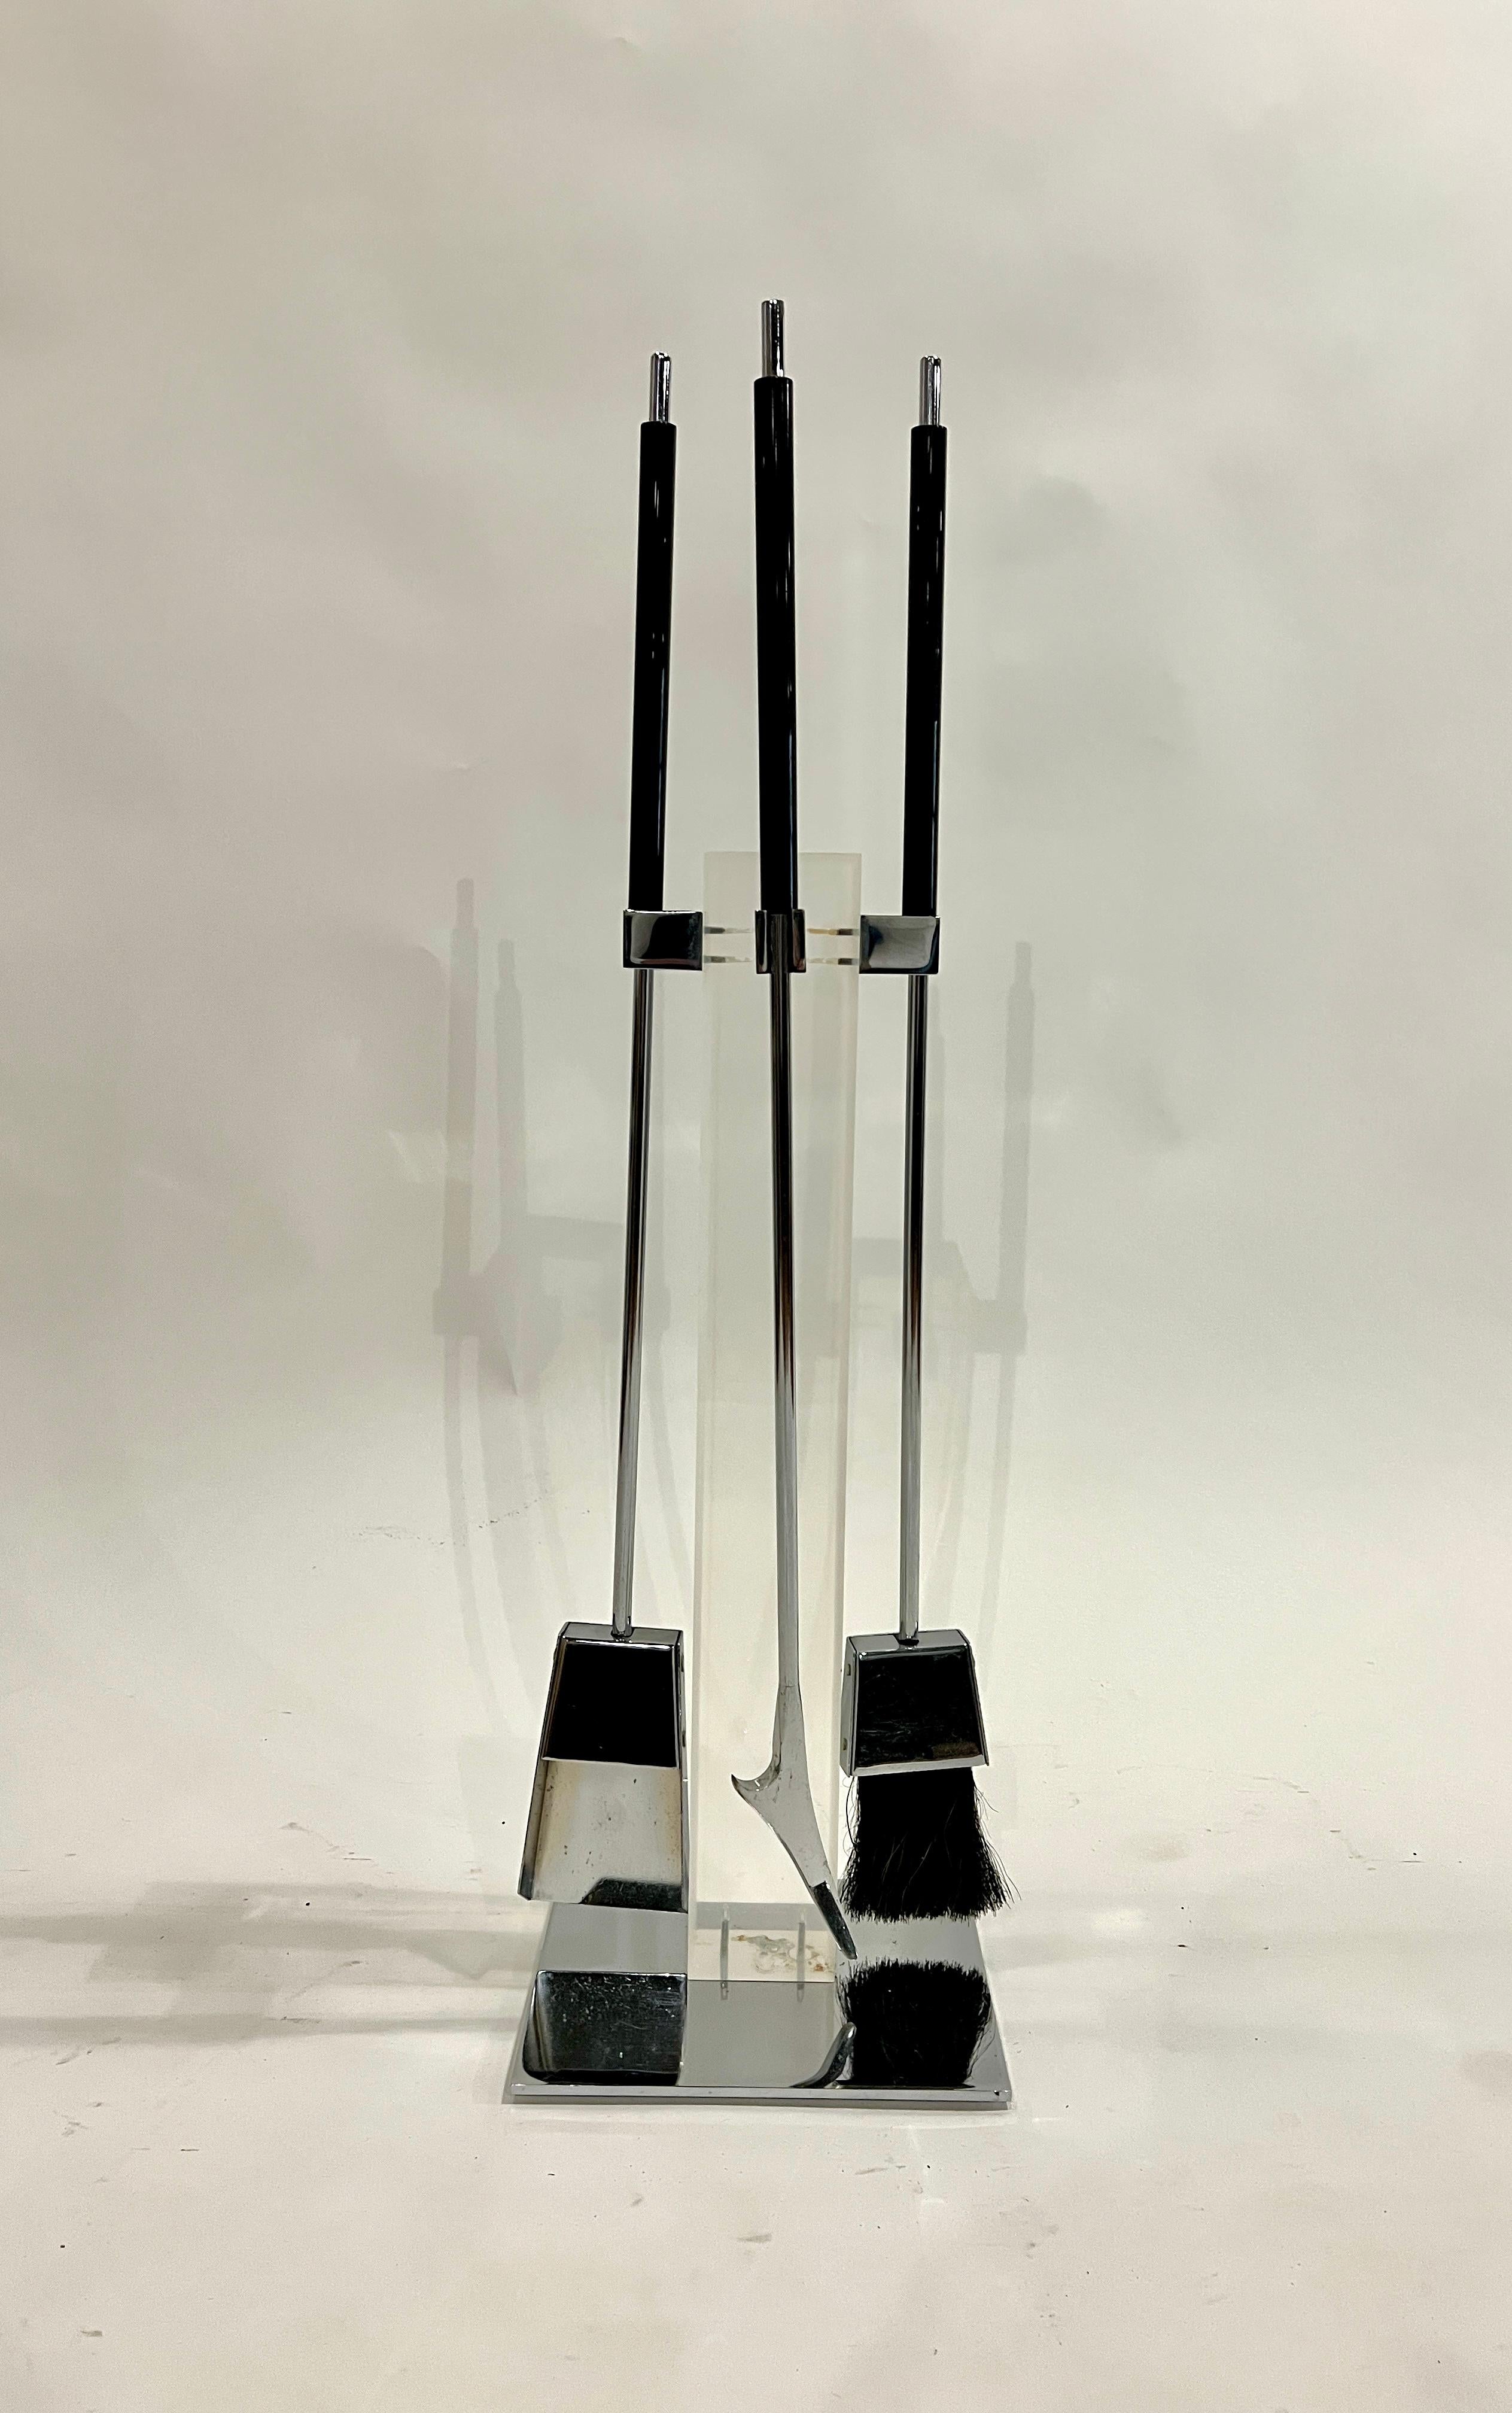 1970's fireplace tool set by Alessandro Arizzi, Italy. The stand is made of a tall lucite post with chrome tools and accents. The chrome is very clean and appears to be unused. 